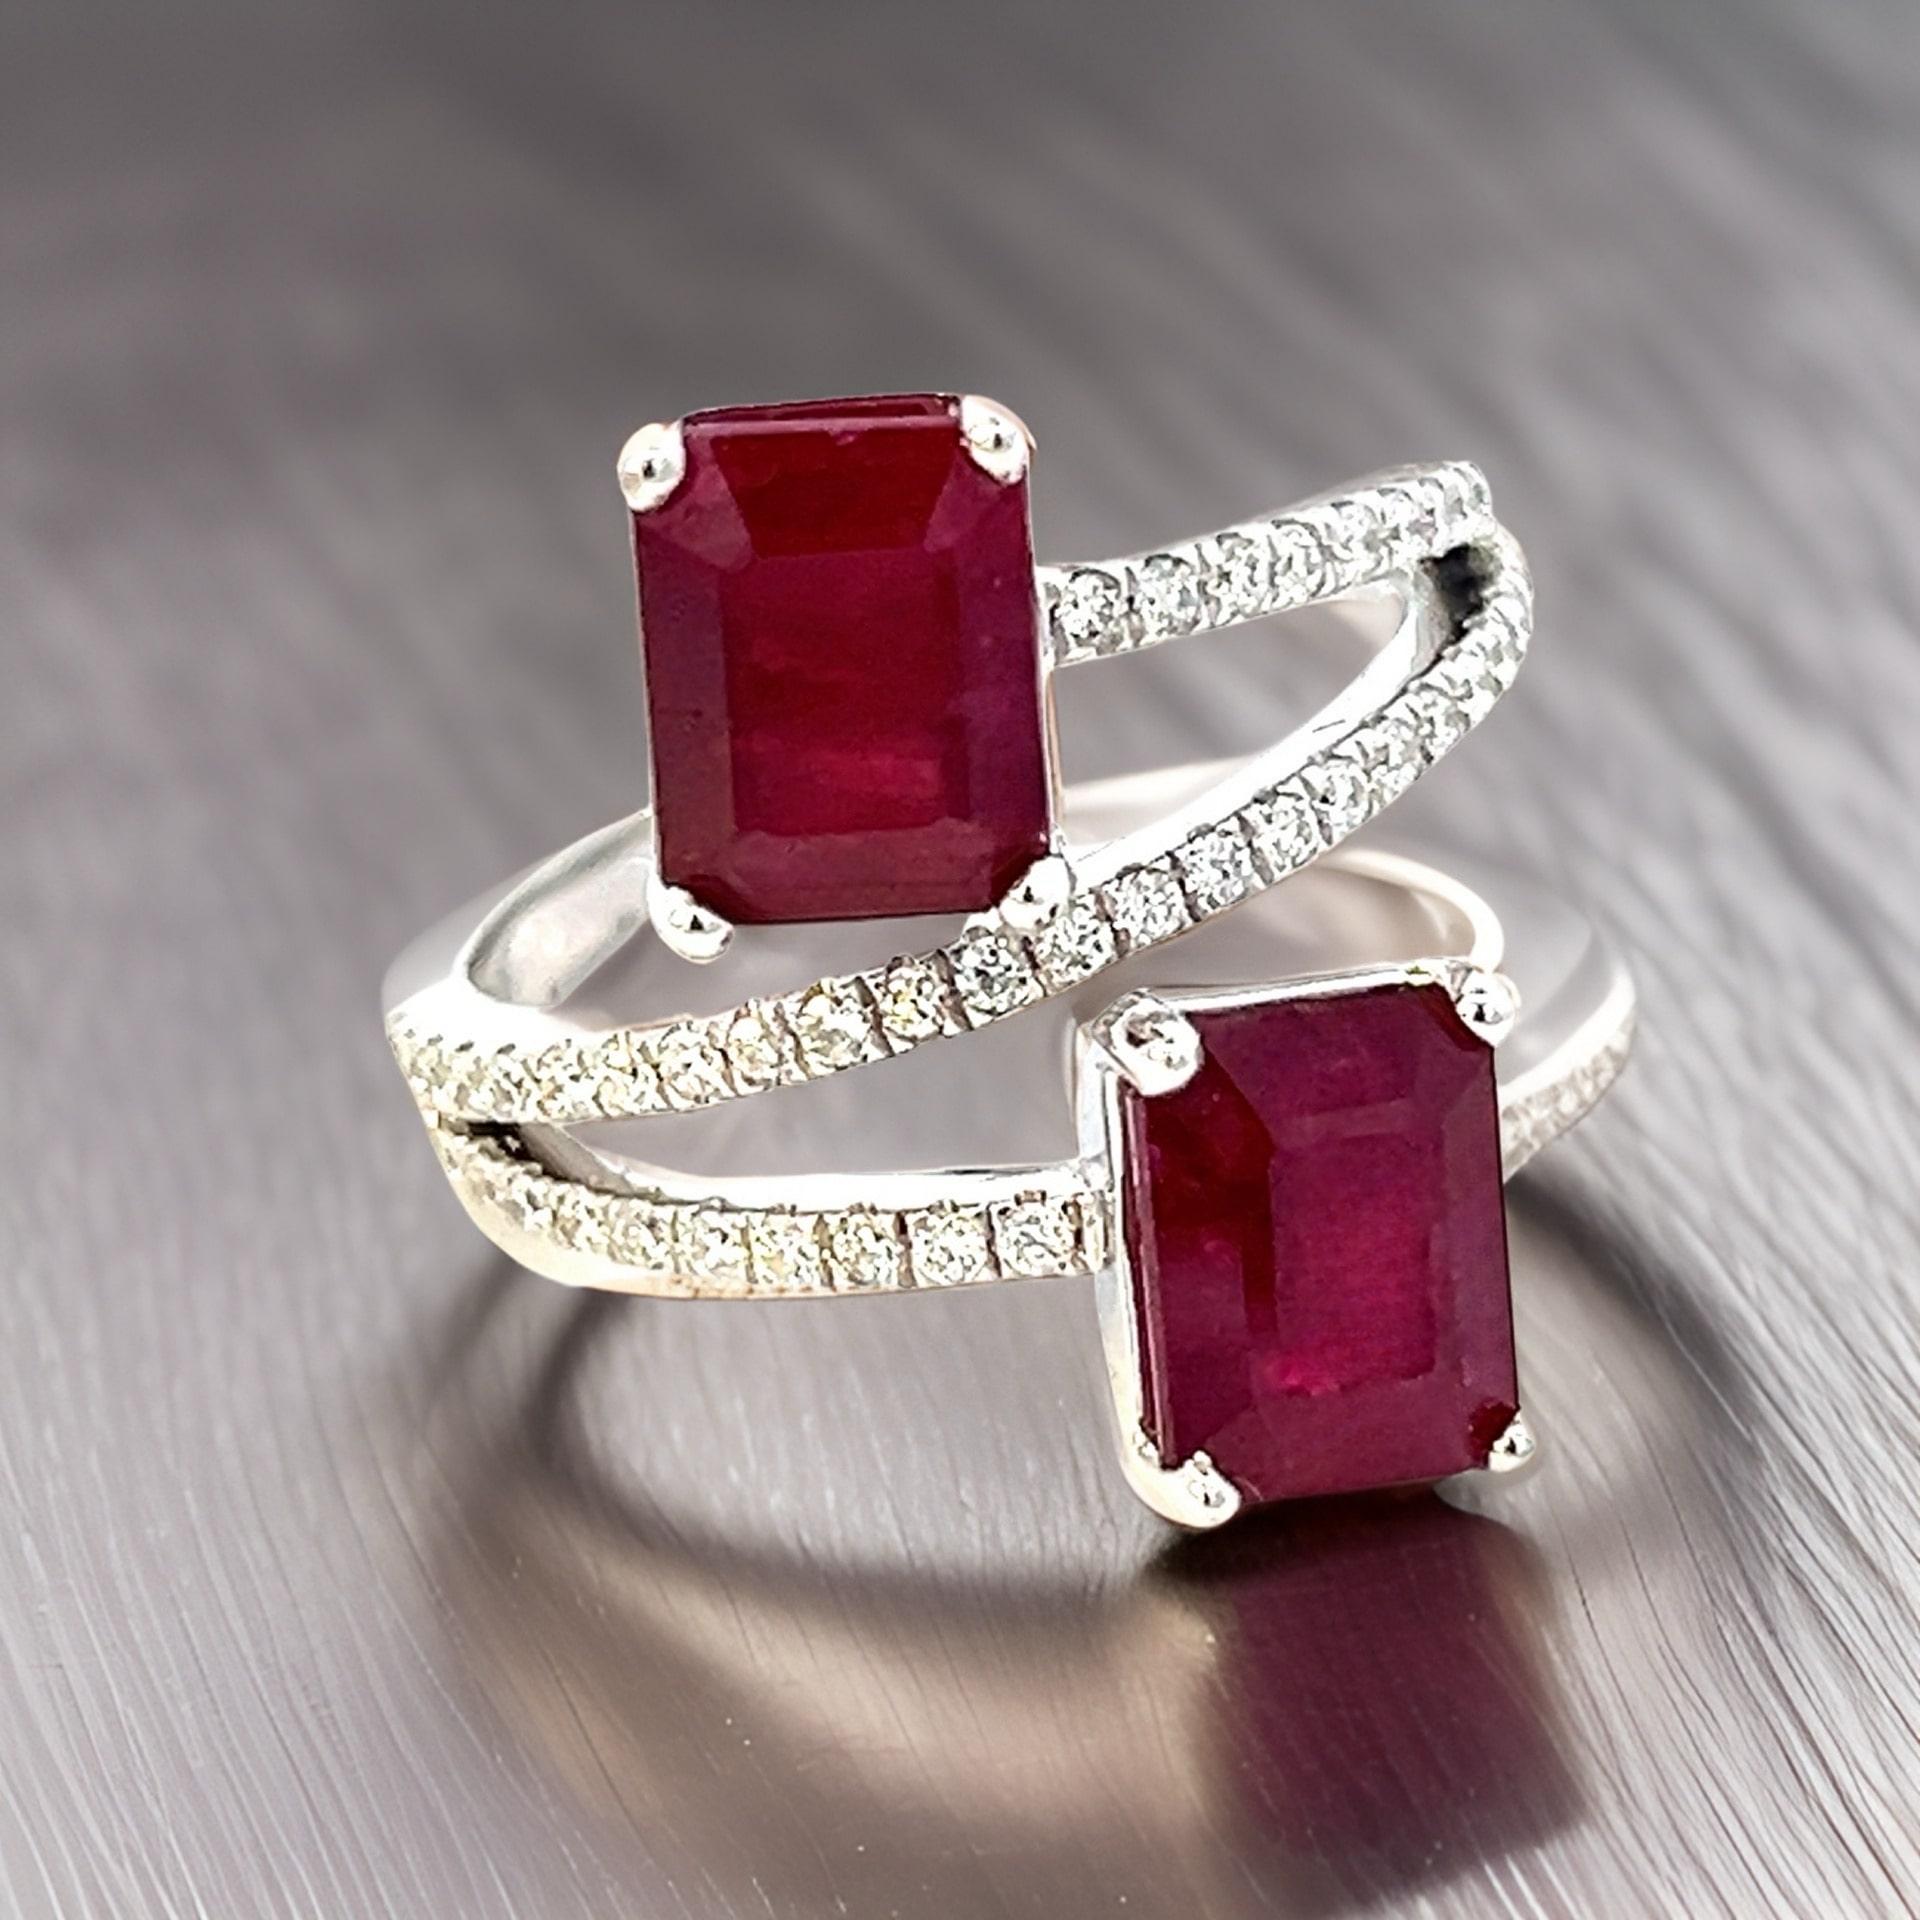 Natural Dual Ruby Diamond Ring 6.5 14k W Gold 5.02 TCW Certified In New Condition For Sale In Brooklyn, NY